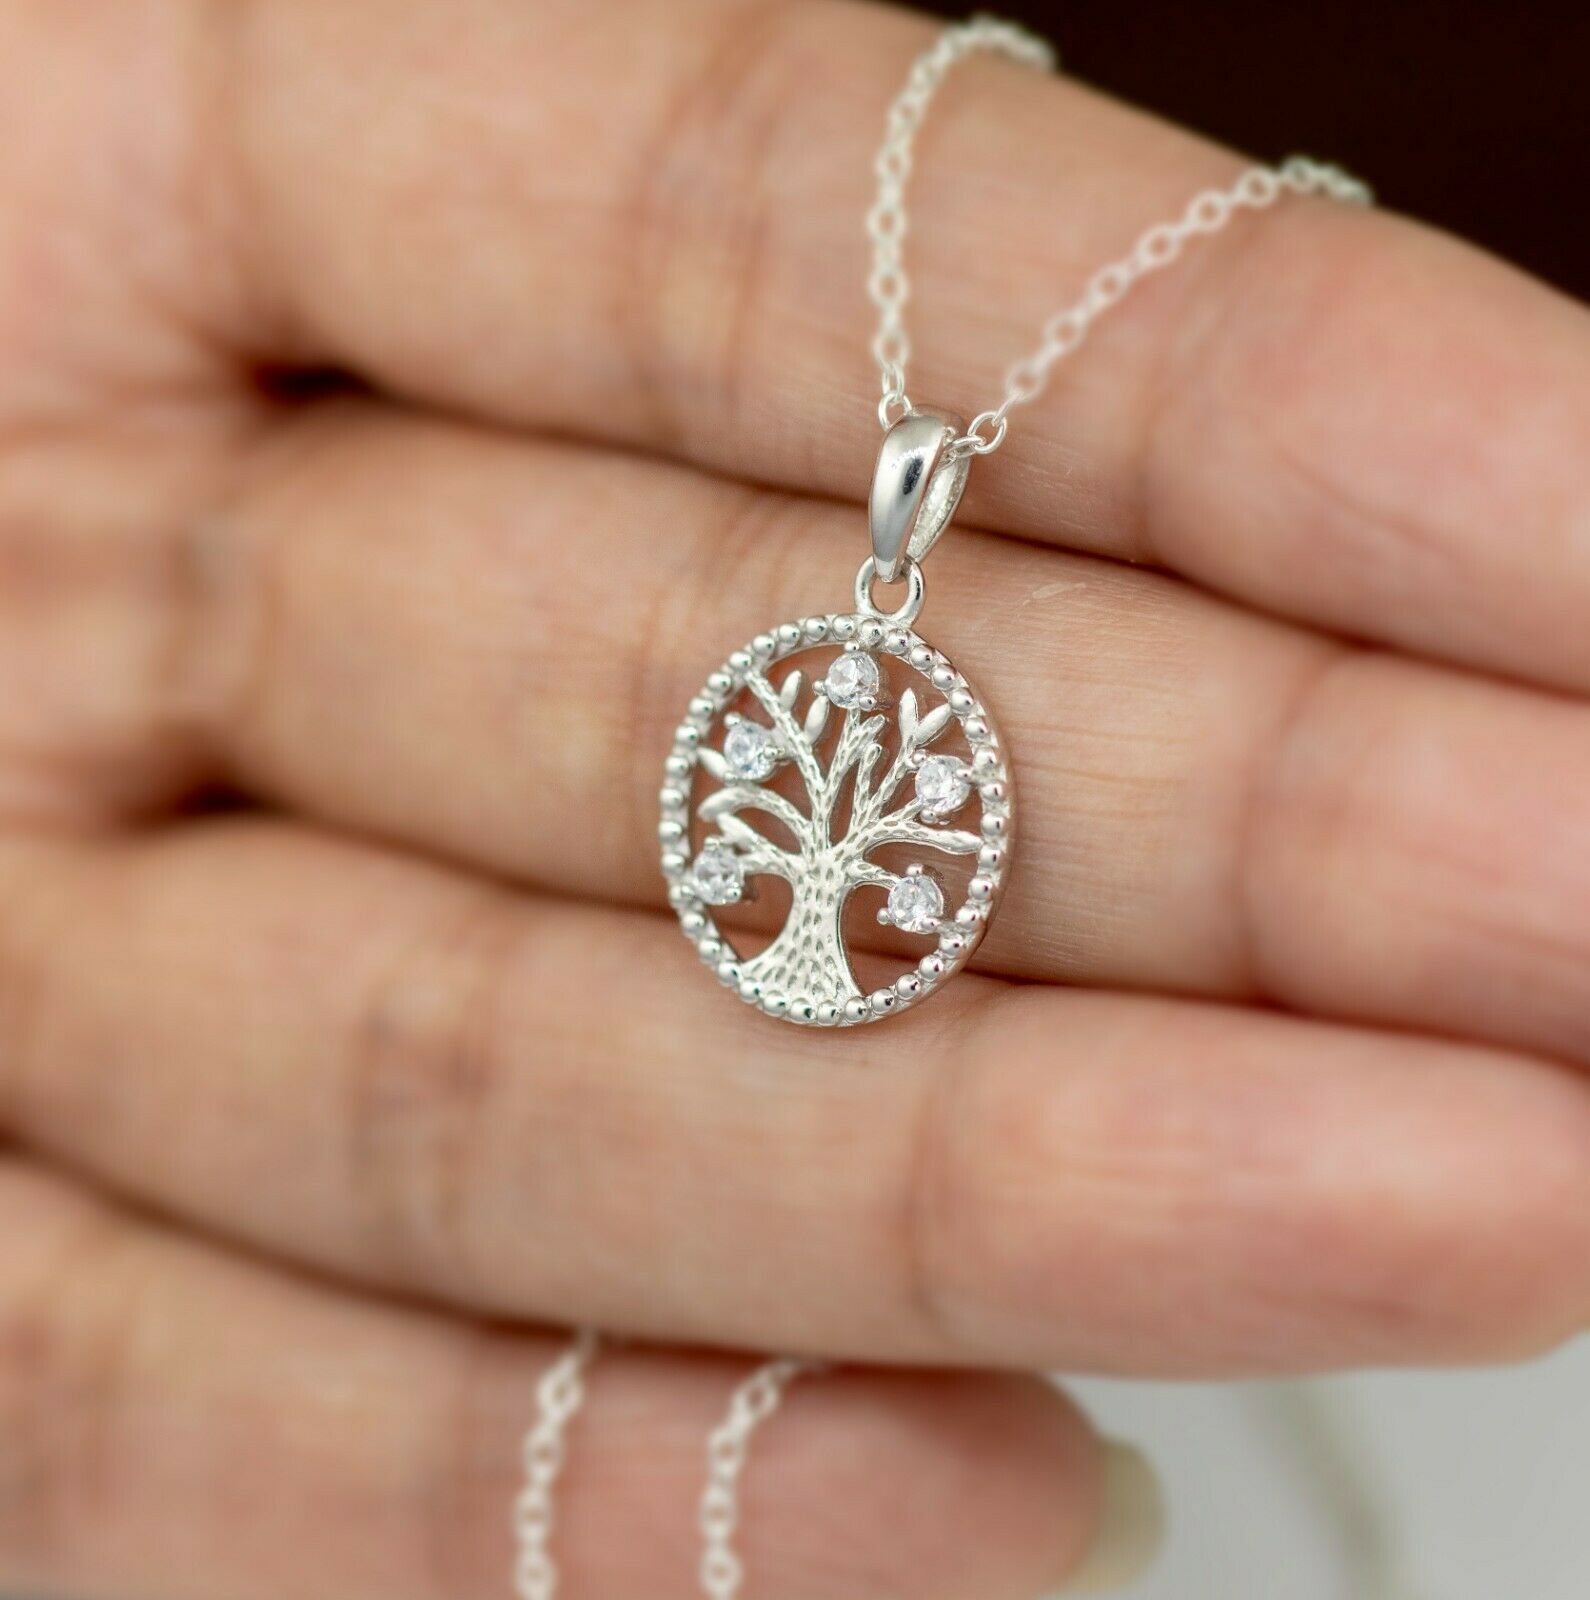 Sterling Silver 925 Diamond Pendant Necklace Tree Of Life Ladies Jewellery Gift